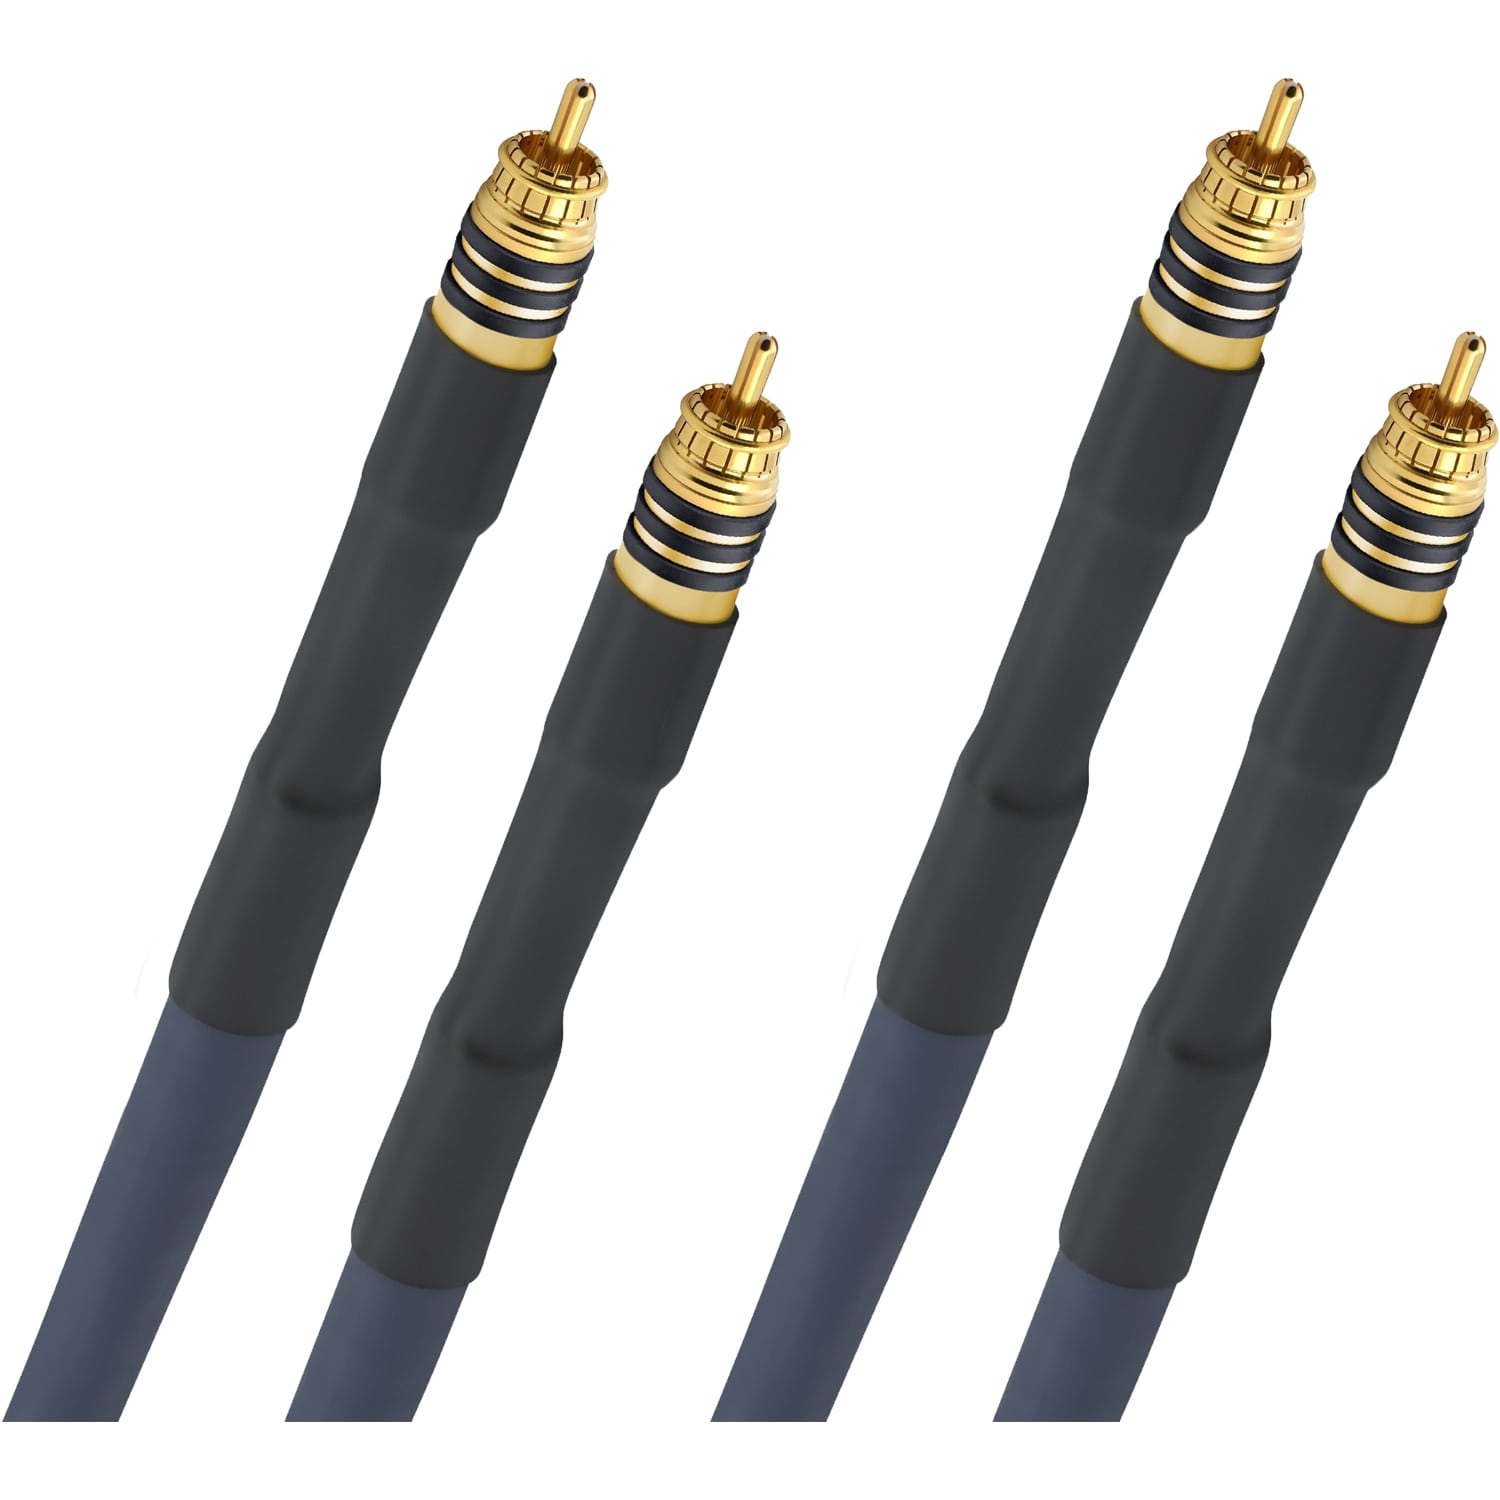 Кабели межблочные аудио Oehlbach STATE OF THE ART XXL Cable RCA, 2x1,25m, gold, D1C13113 кабели межблочные аудио oehlbach excellence sub link subwoofer cable 5 0m bw d1c33162